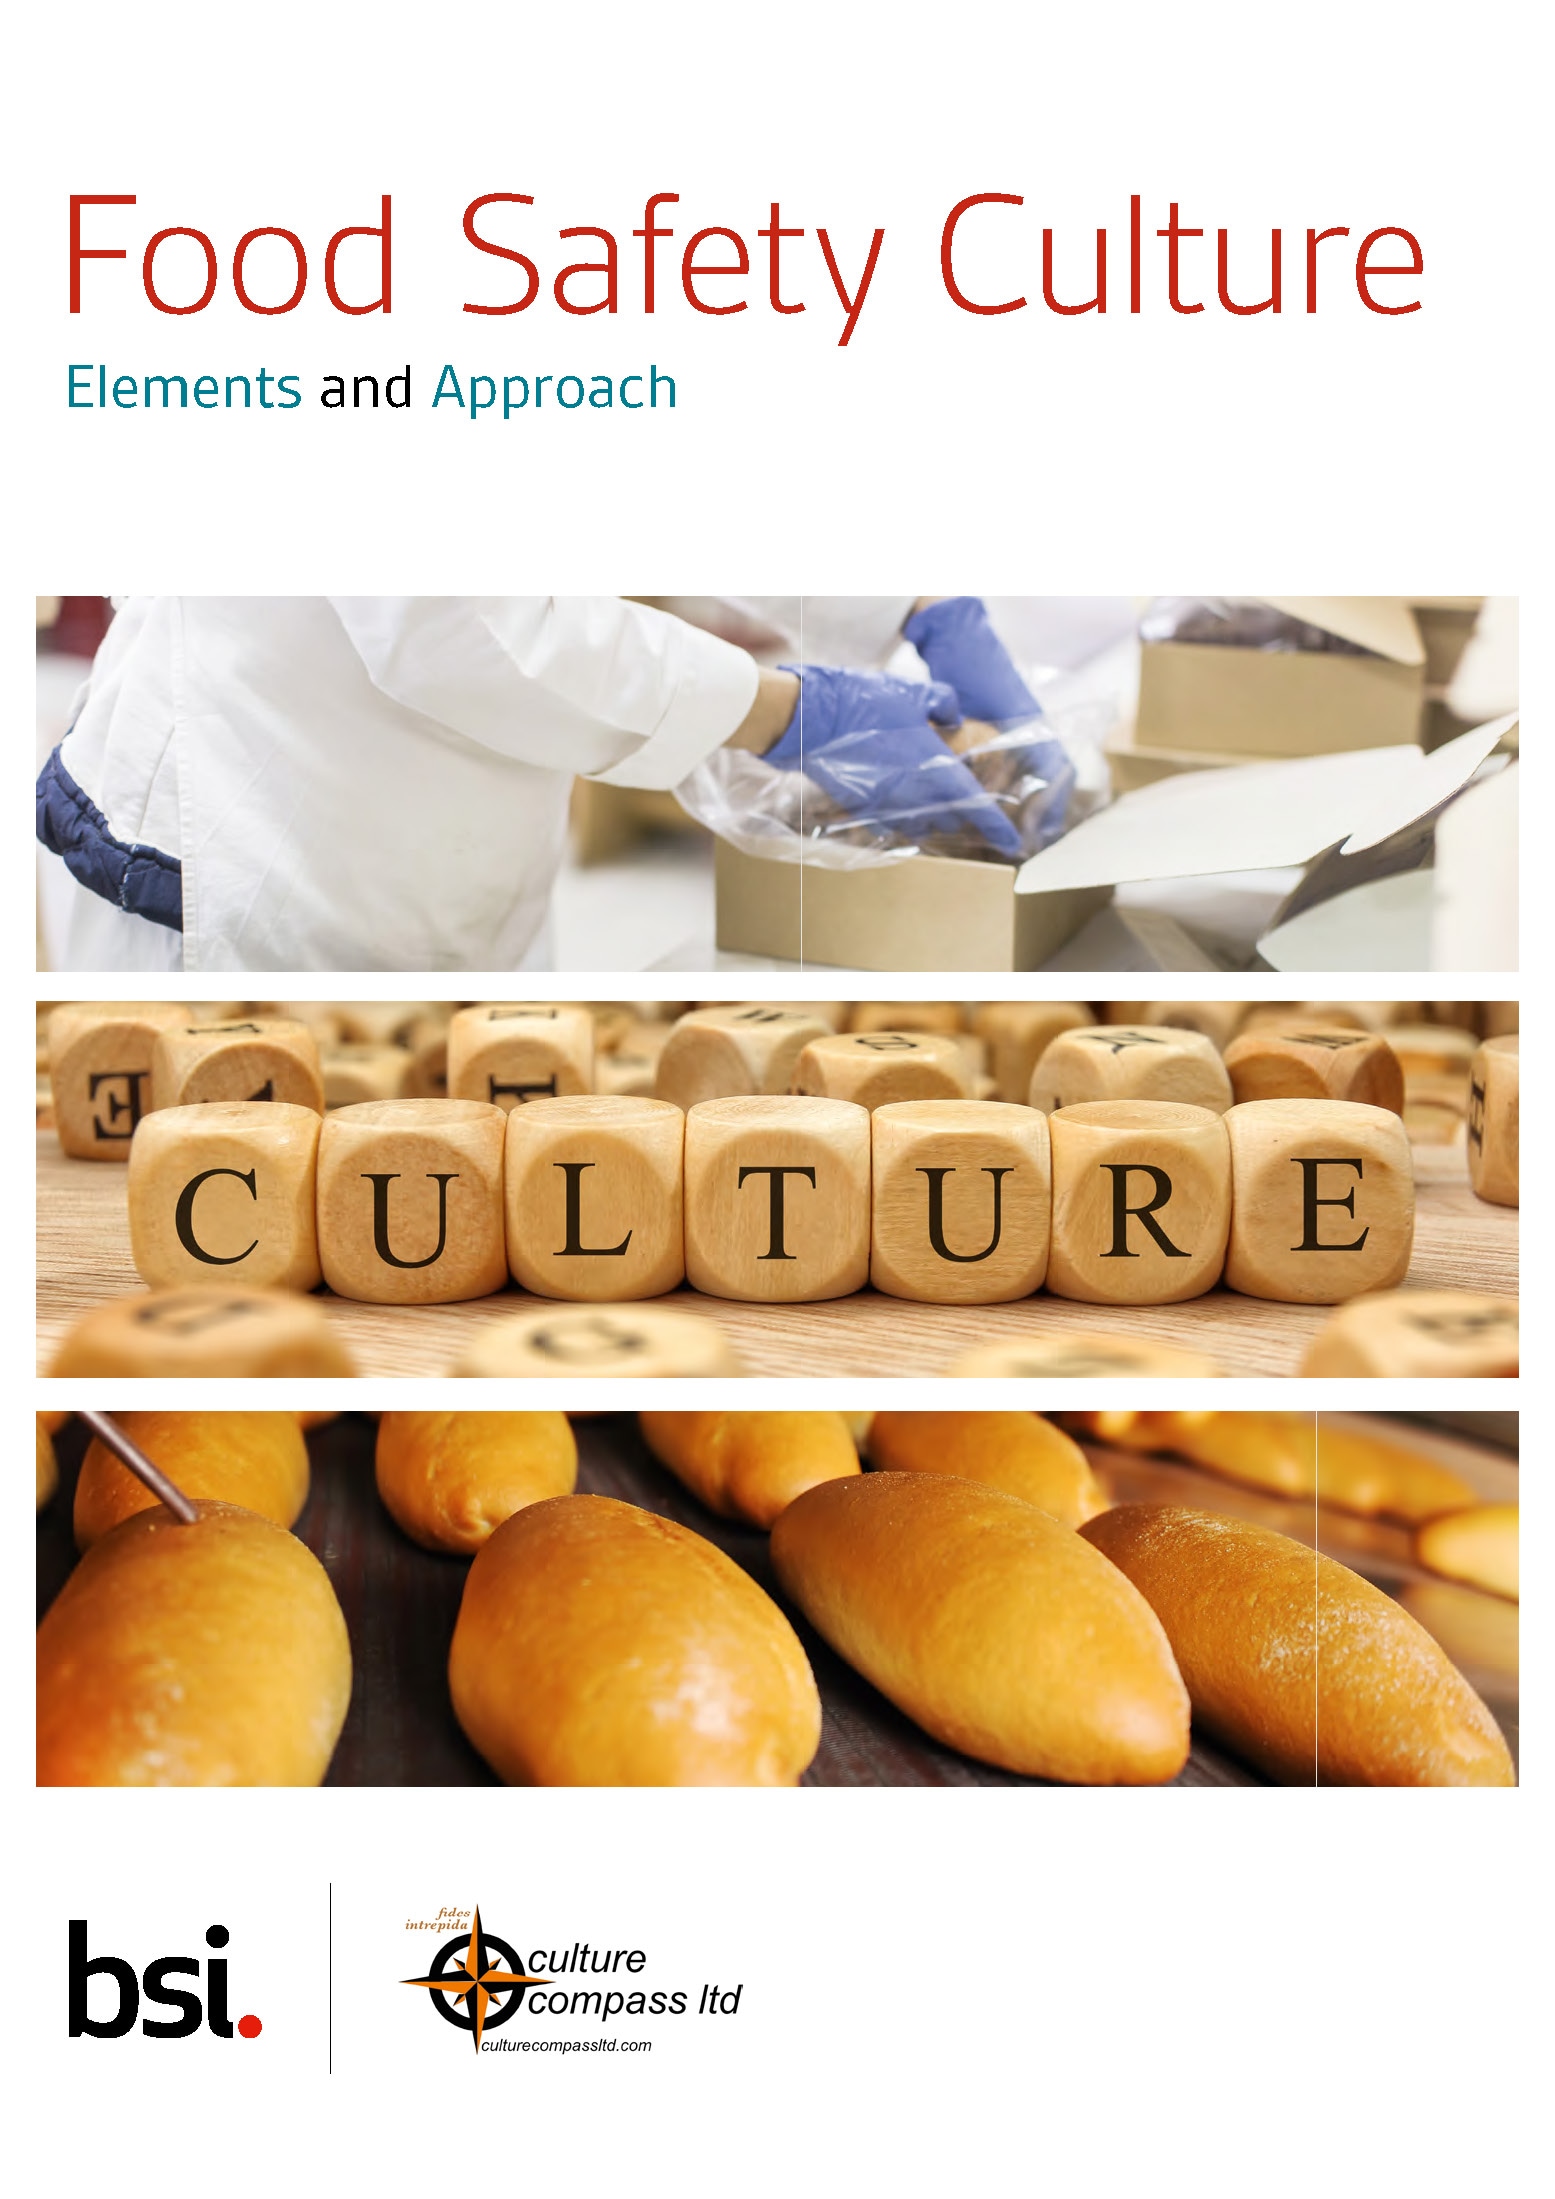 Food Safety Culture whitepaper